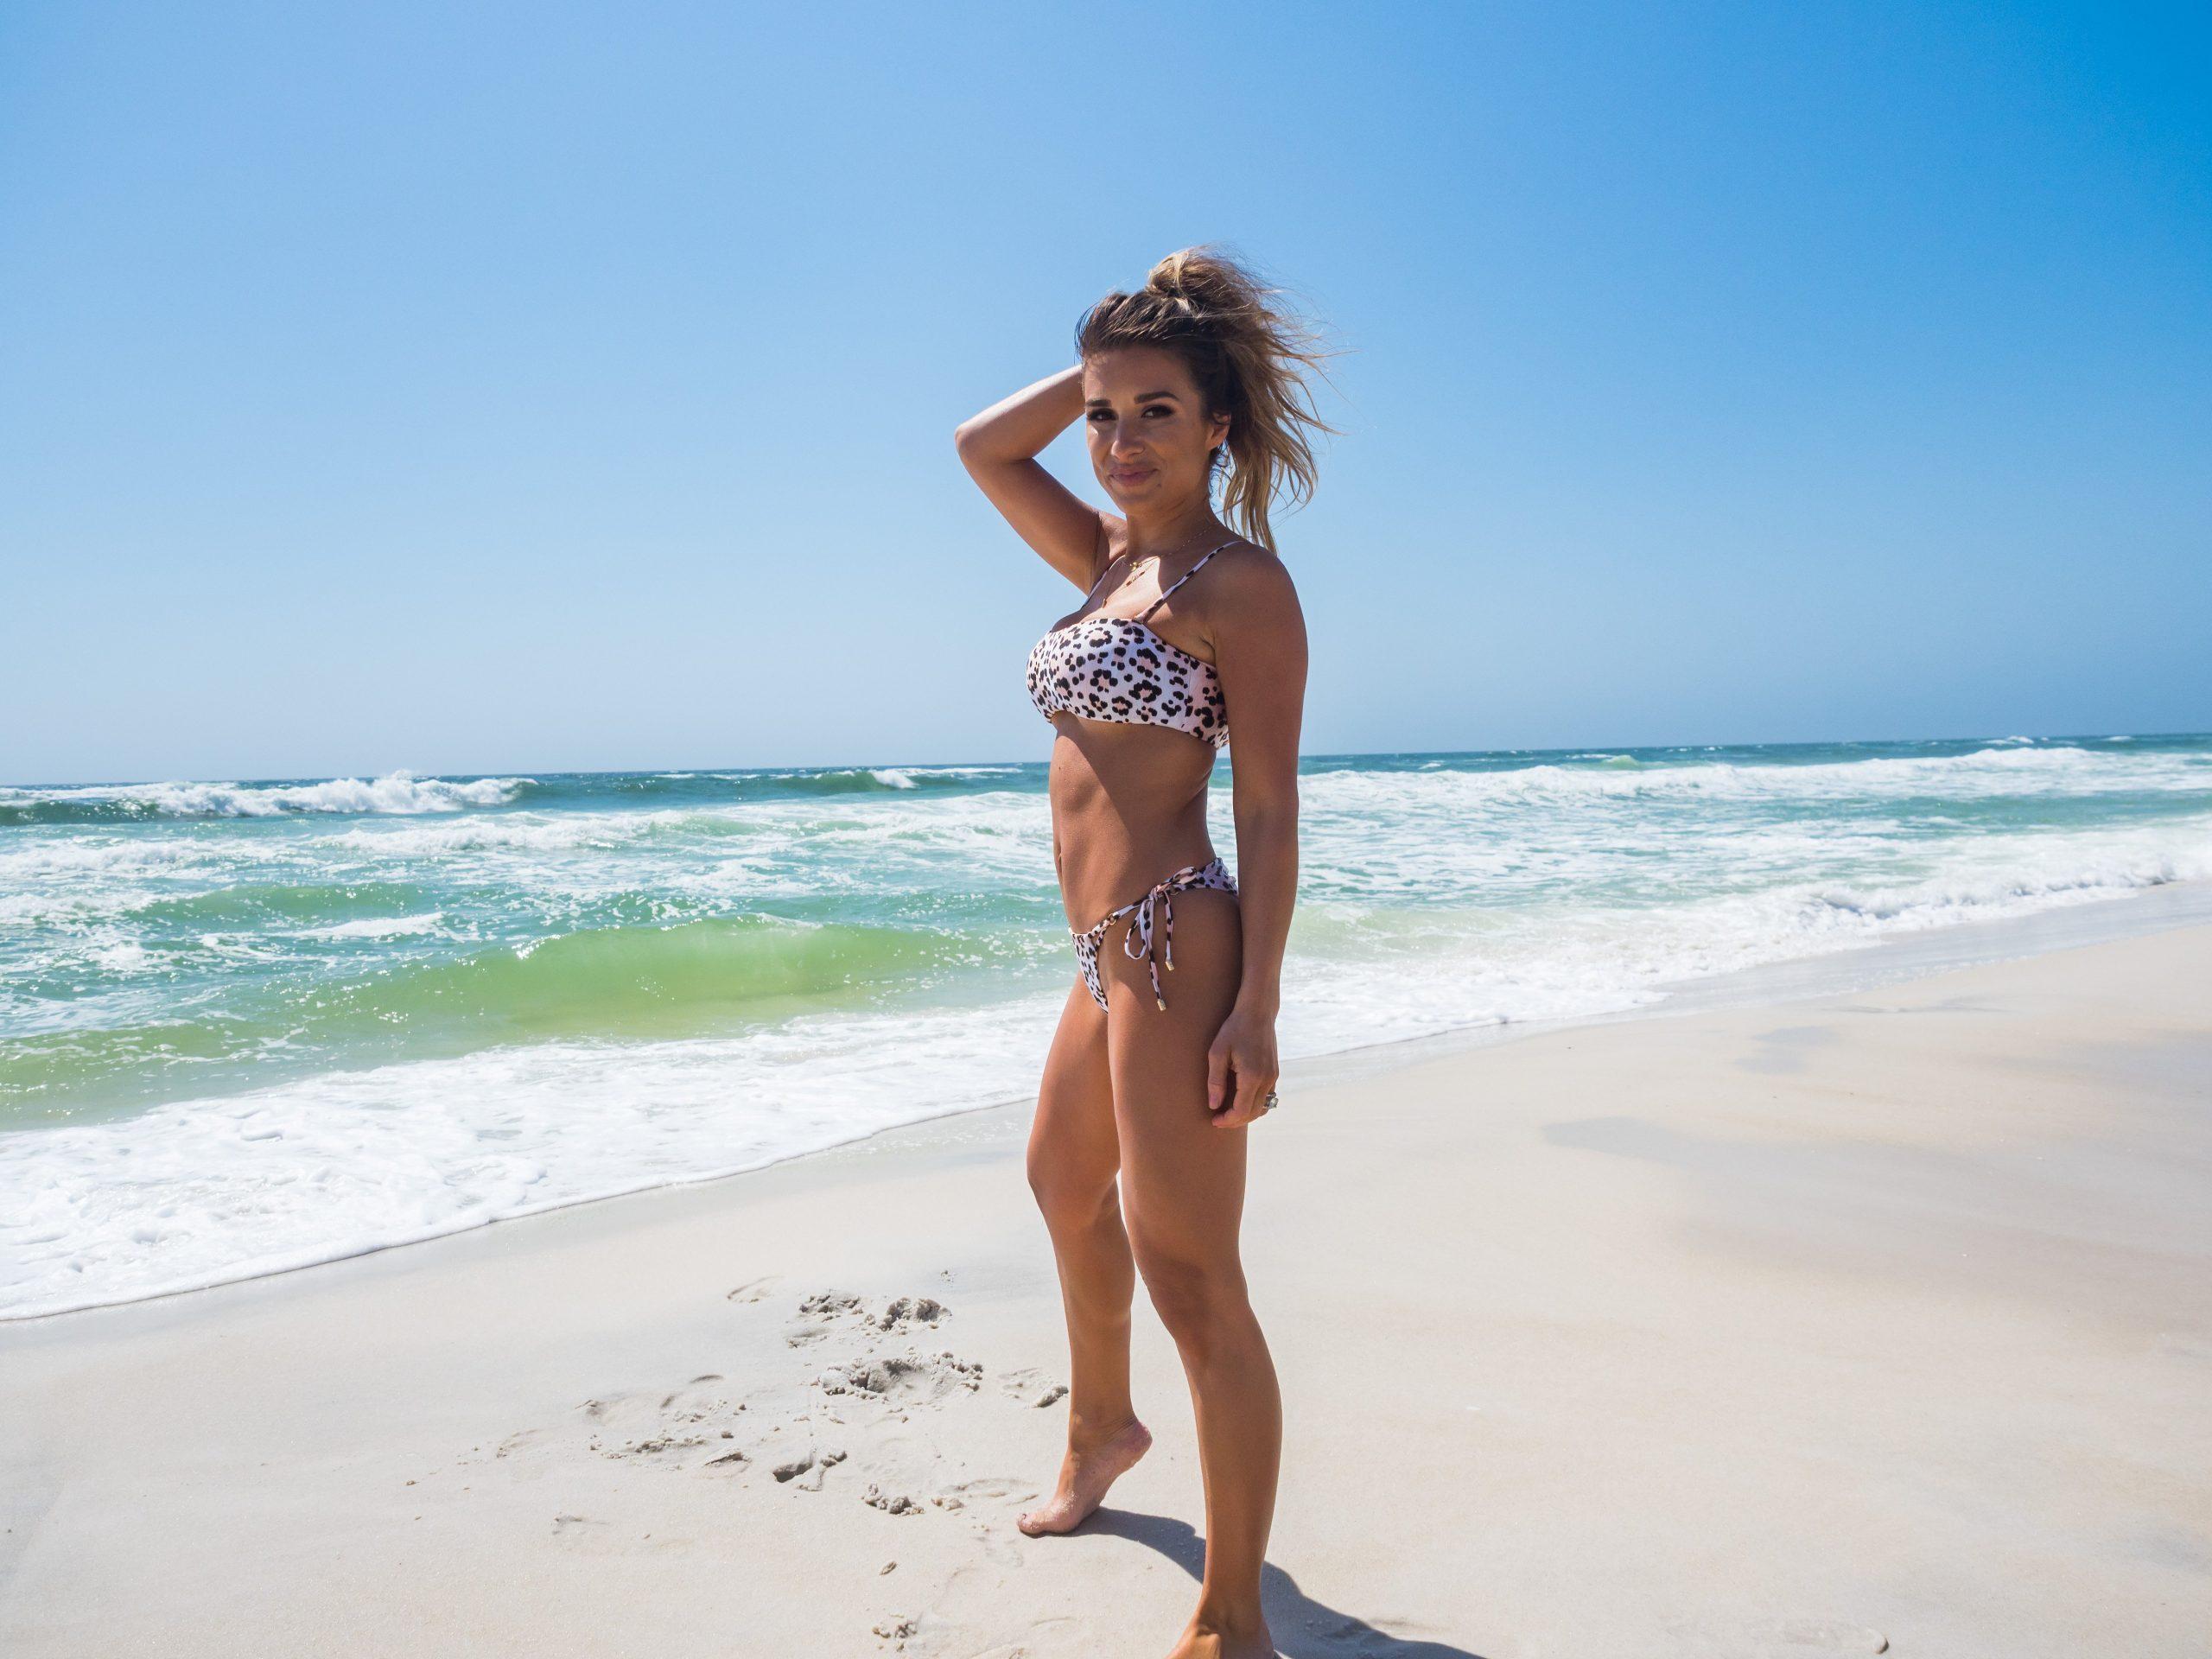 Jessie James Decker shows off her flawless figure after dropping more than 25lbs following the birth of her third child a little over a year ago. The 31-year-old singer — who is currently on tour — paraded her toned physique in a black halter neck bikini, as well as an animal print one as she showed off her wild side. The country star — who is married to NFL star Eric Decker — was photographed for the South Beach Diet, for which she is an ambassador. Jessie has recently filmed a new commercial for the weight loss and meal delivery company featuring a song called Welcome To The Party which she wrote especially for the spot, and is still going strong on the plan. Talking about touring while on the South Beach plan, Jessie said: ‘If you were to catch me backstage after my shows on tour, you would see the chocolate protein shake on ice w/ almond milk in hand. ‘It’s amazing for recovery since I’m pretty much doing 90 minutes of a workout on stage!’ The songstress recently revealed she had lost 25lbs on the plan since giving birth to her third child in March 2018 and is now back down to her wedding day weight of 115lbs. Speaking in March she said: ‘I’ve lost 25 pounds, and I'm excited. I've regained my confidence and have the energy I need to maintain this crazy life of mine. ‘I feel really good where I'm at. My goal was to be able to fit into my clothes before I had the baby. I'm now at 115lbs and that was my goal. I weighed 115lbs on my wedding day, so I just wanted to be back where I was and I'm not going to obsess over it, but I'm just gonna maintain where I'm at and just do the best that I can.’ Jessie and Eric also have three children, Vivianne, aged four, Eric, aged three, and Forest, who turned one in March. 21 May 2019 Pictured: Jessie James Decker parades her bikini body in a new photoshoot for South Beach Diet, released on May 21, 2019. Photo credit: South Beach Diet/ MEGA TheMegaAgency.com +1 888 505 6342 (Mega Agency TagID: MEGA426031_003.jpg) [Photo via Mega Agency]